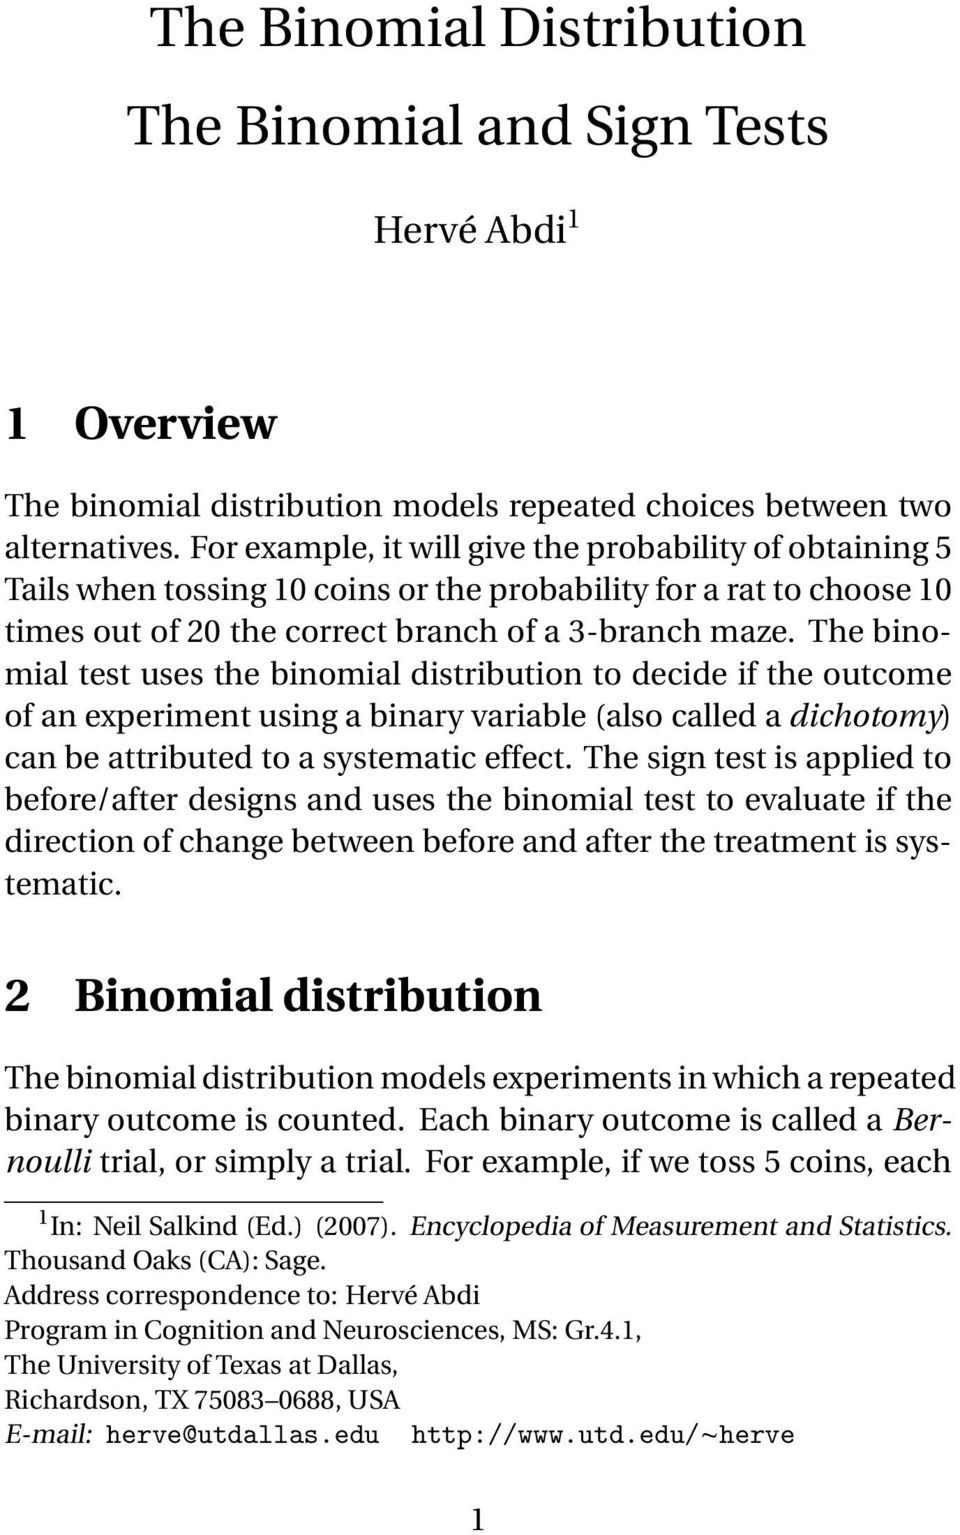 The binomial test uses the binomial distribution to decide if the outcome of an experiment using a binary variable (also called a dichotomy) can be attributed to a systematic effect.